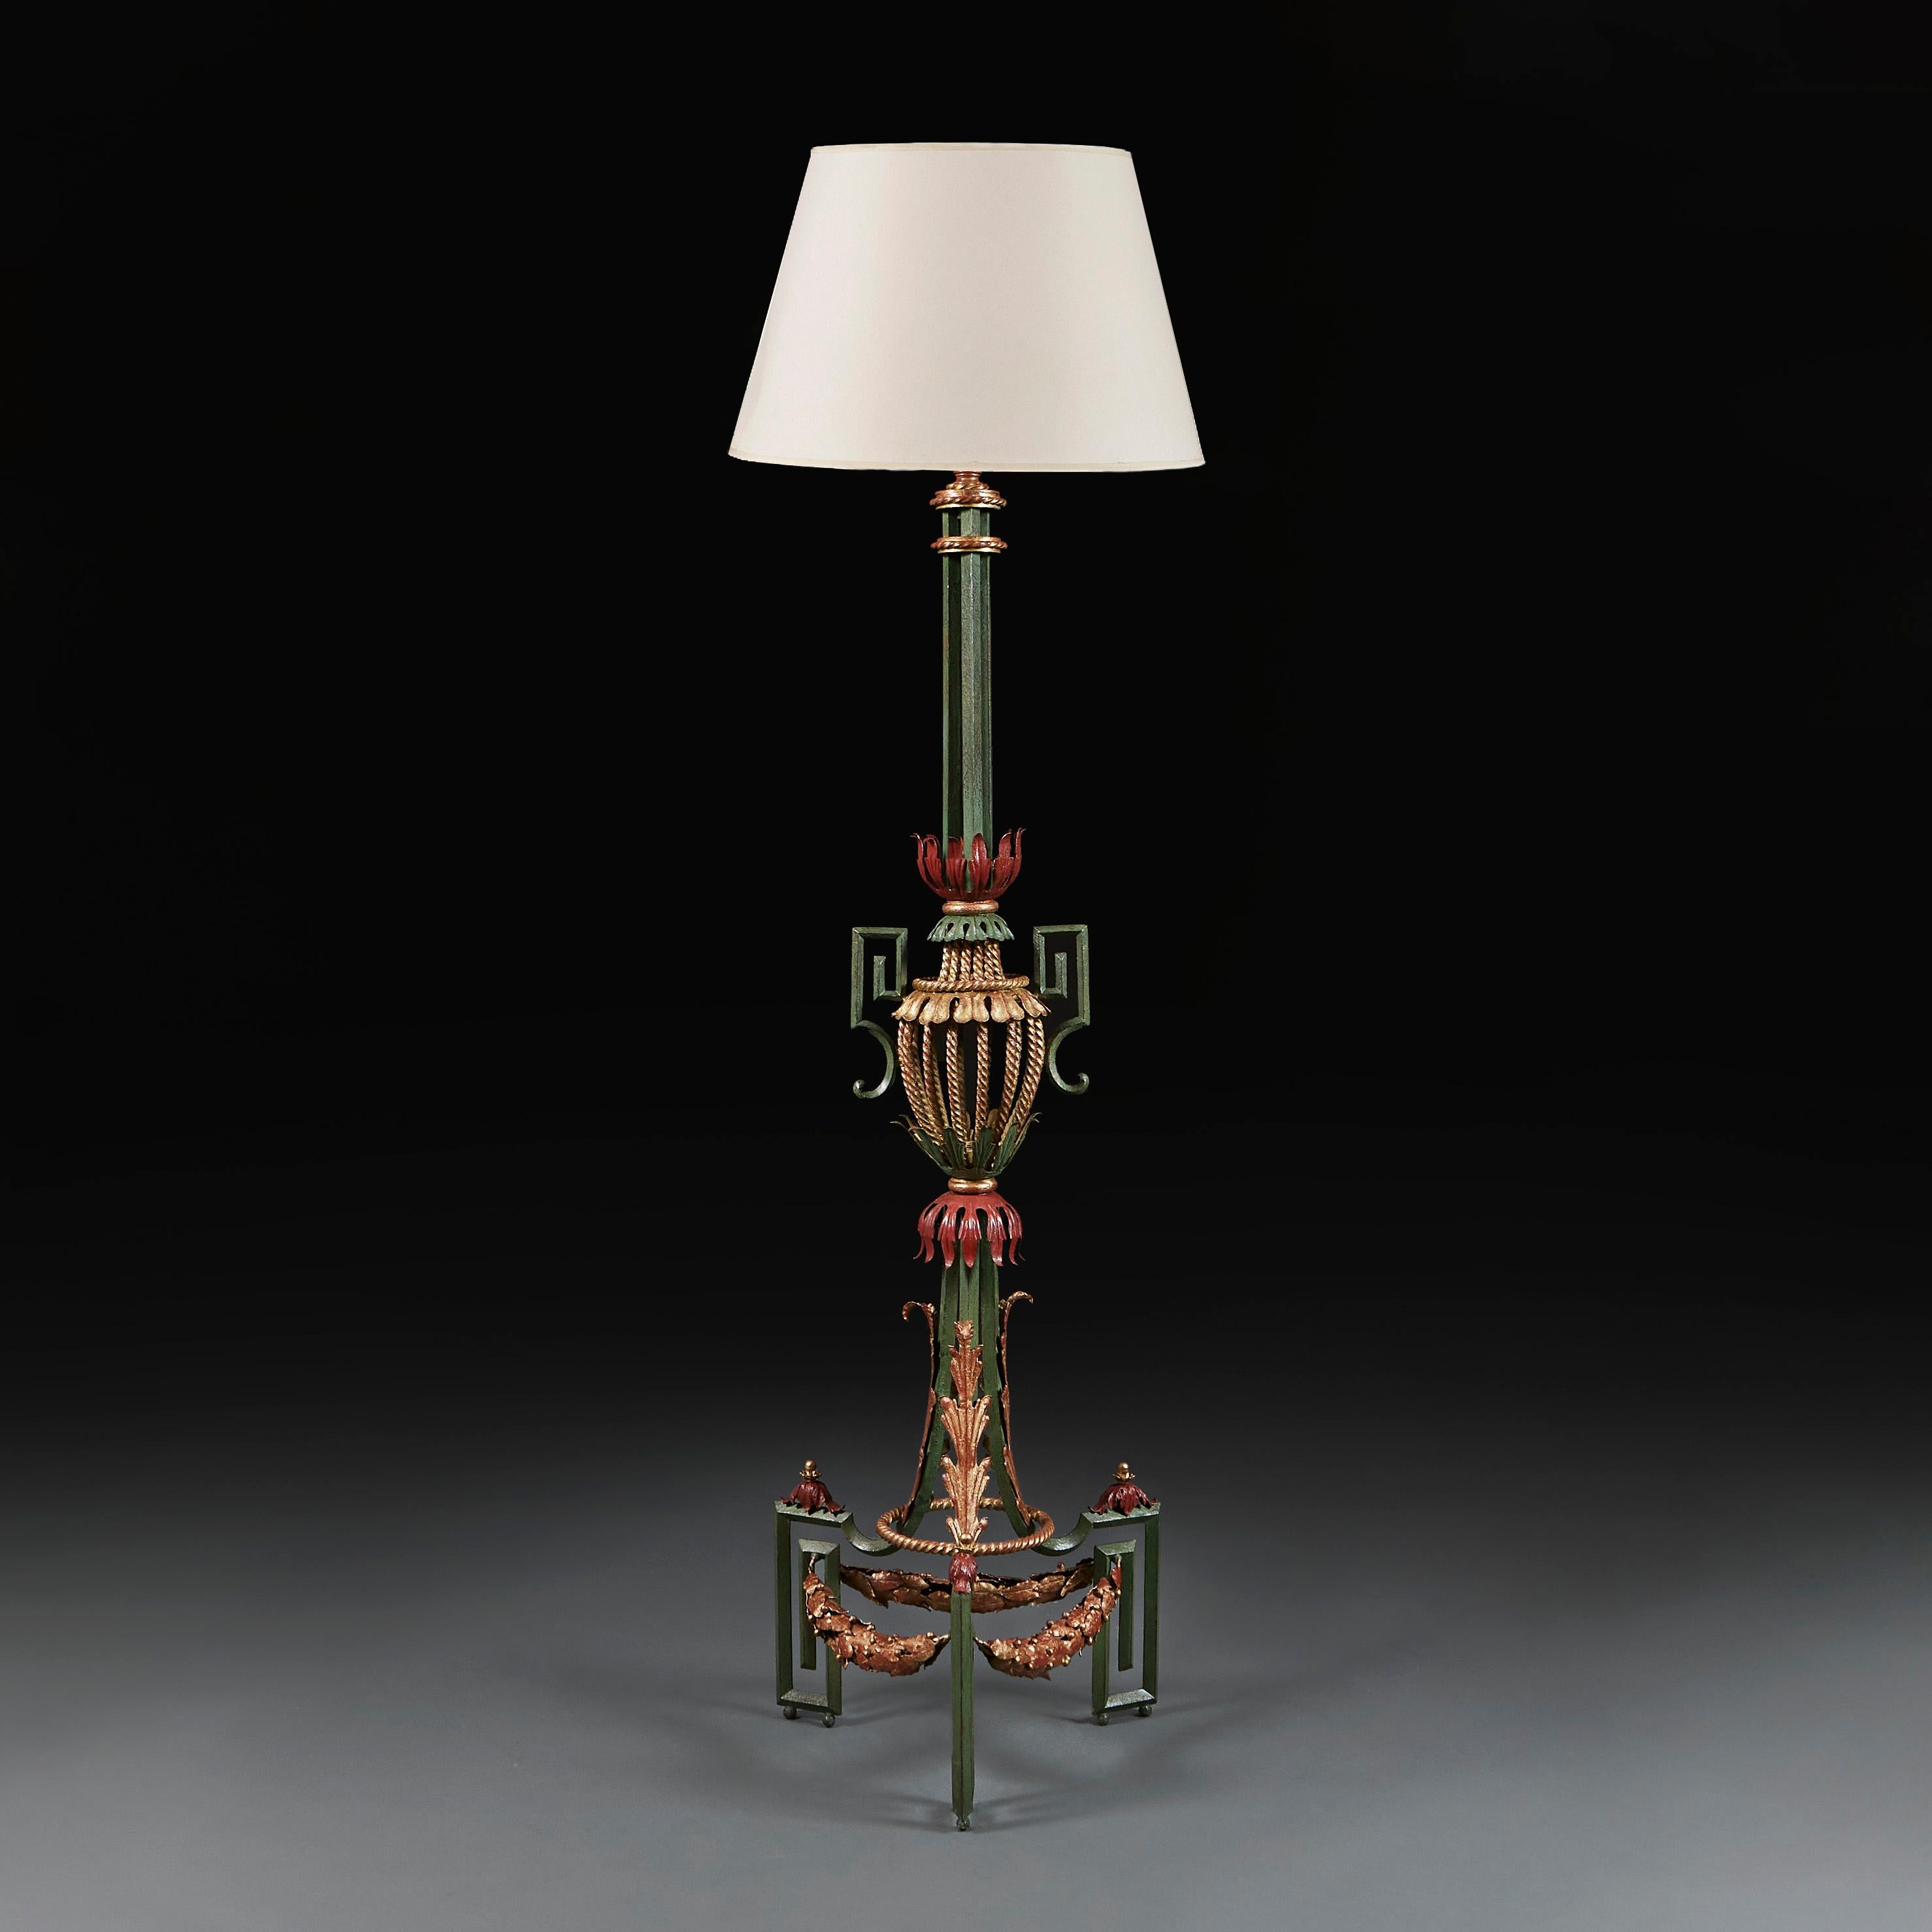 France, circa 1940

A striking mid-century painted wrought iron floor lamp after Gilbert Poillerat with a central stylized urn, Greek keys motifs, trailing gold acanthus leaves and stretchers in the form of berried garlands.

Height